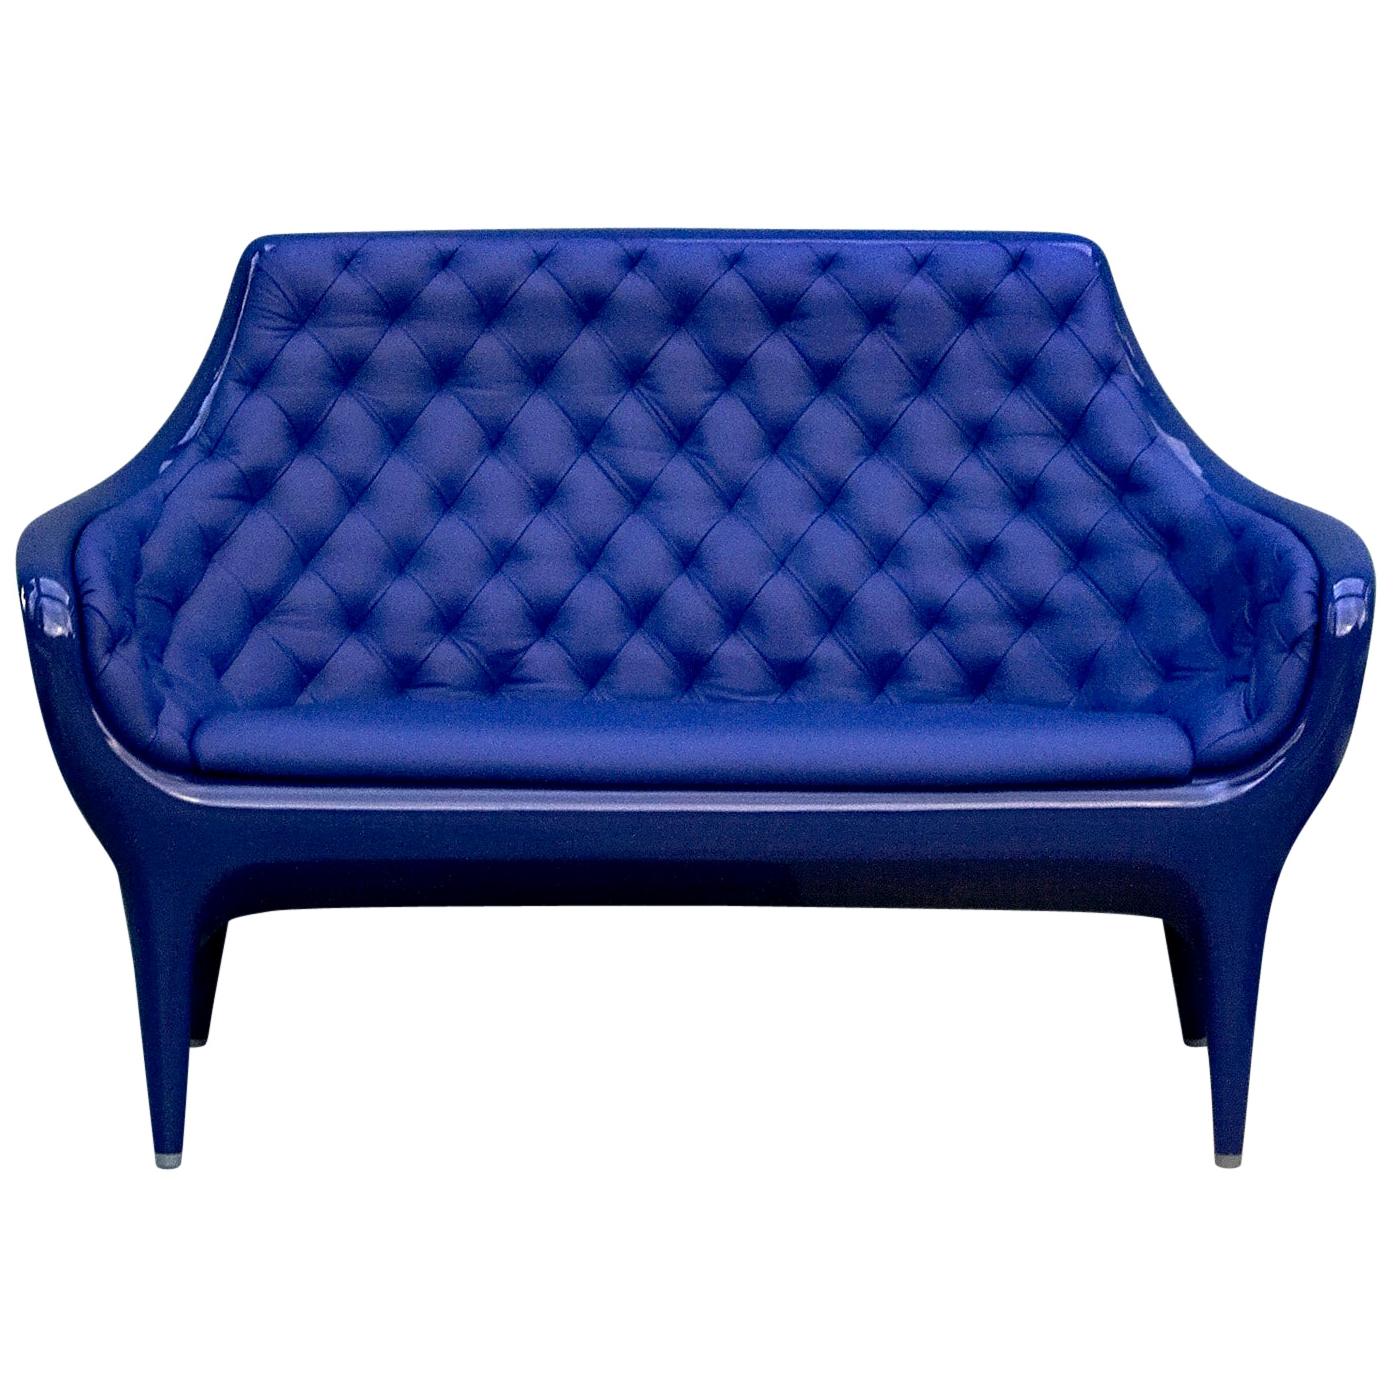 Jaime Hayon Contemporary Blue Showtime Sofa Lacquered by Bd, Barcelona